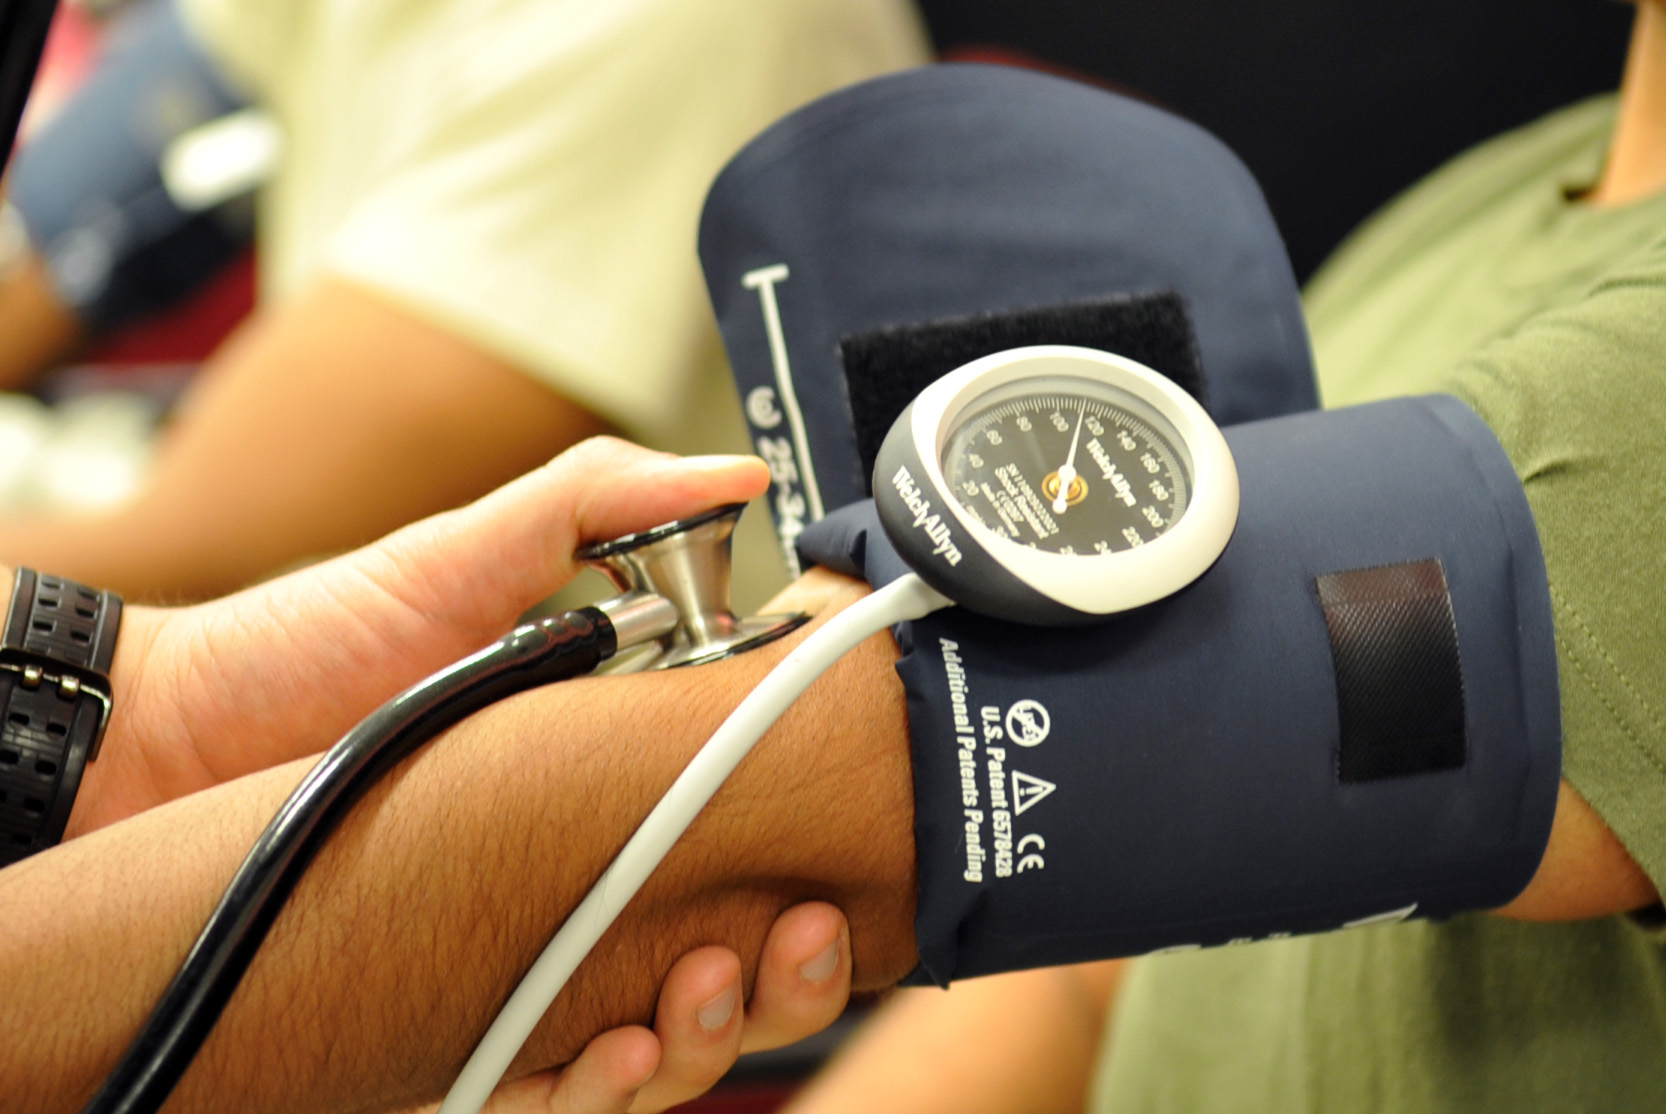 Free Blood Pressure Testing for Sefton residents as part of Know Your Numbers! Week